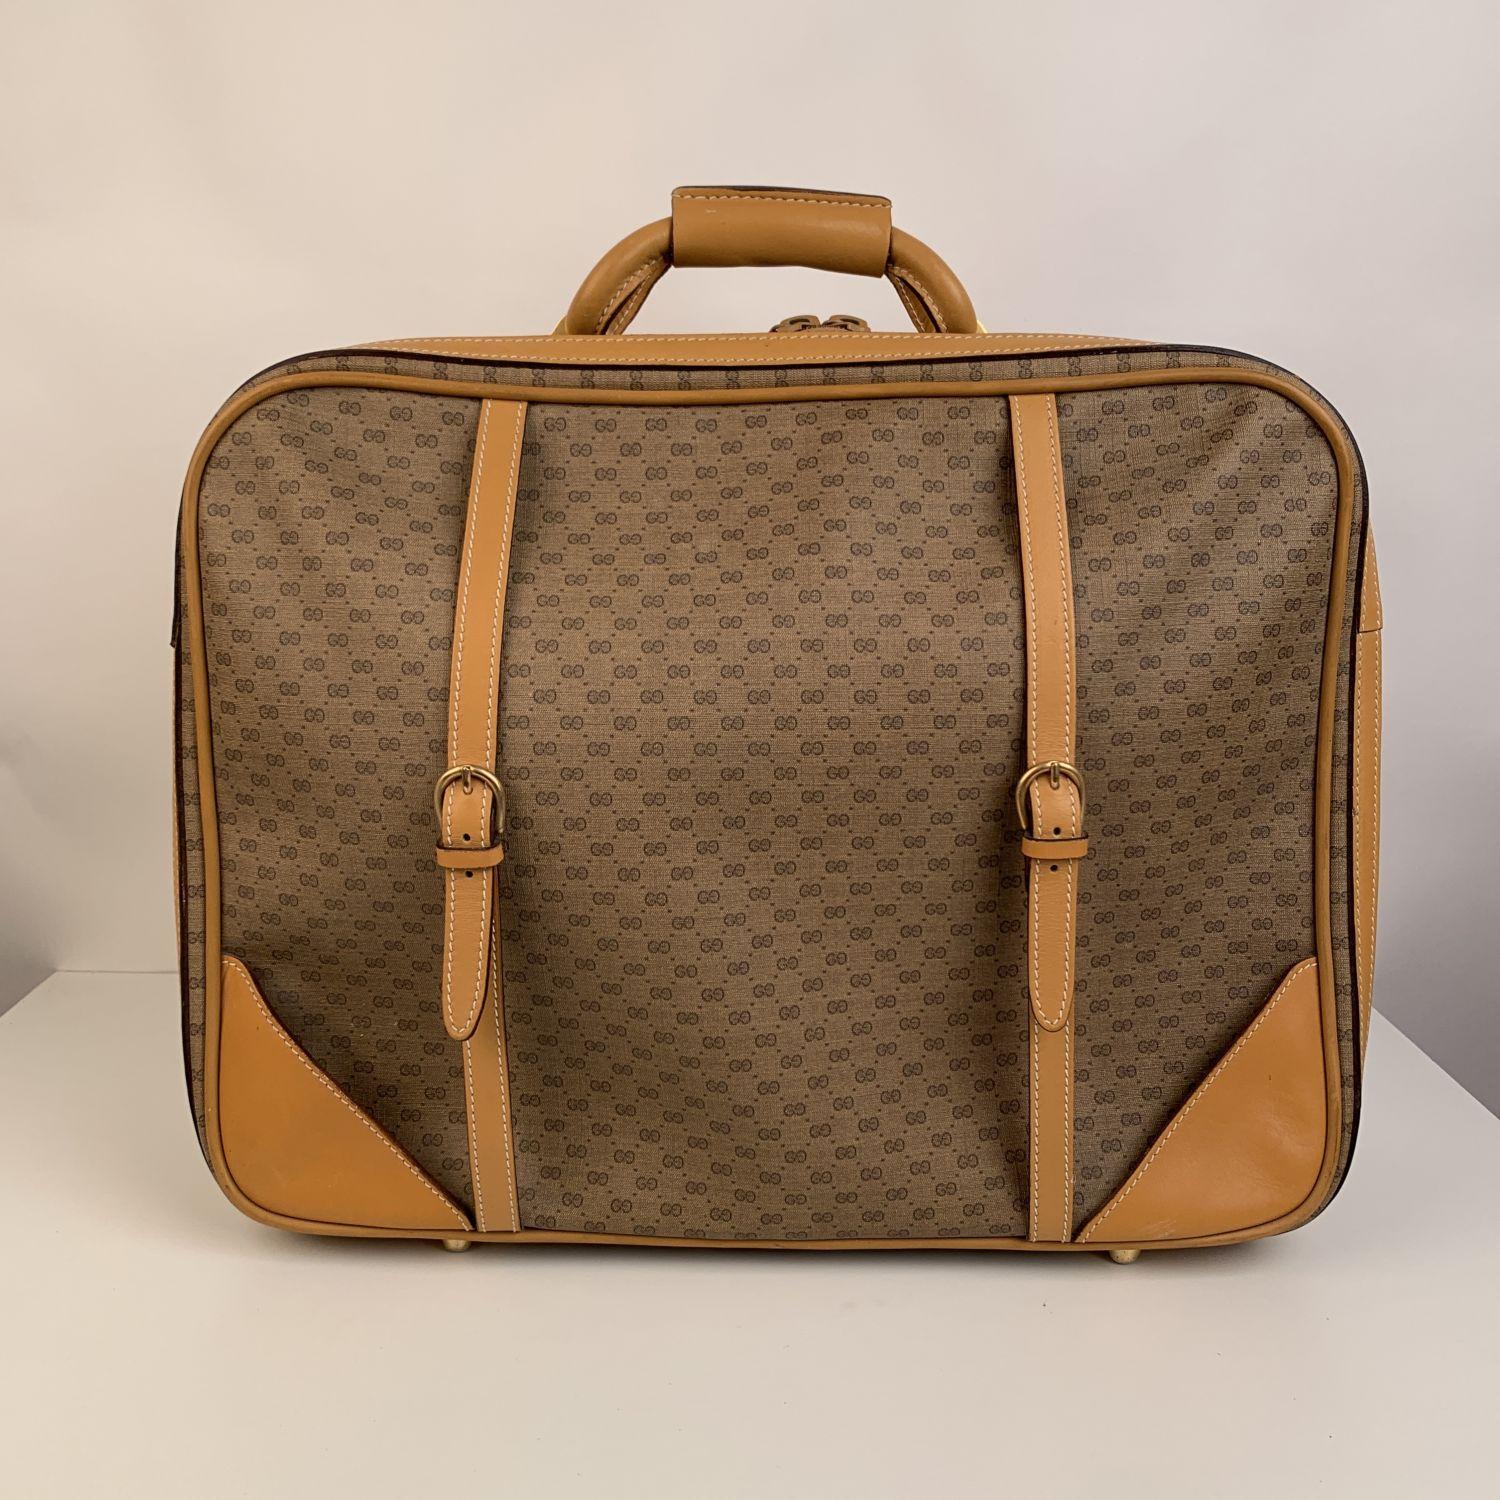 Gucci Vintage Beige Monogram Canvas Cabin Size Travel Bag. GG -GUCCI monogram canvas & Genuine leather trim. Wrap-around dual zipper closure. Gold metal hardware. 4 bottom feet. Canvas lining. 1 main compartment with dual straps for securing